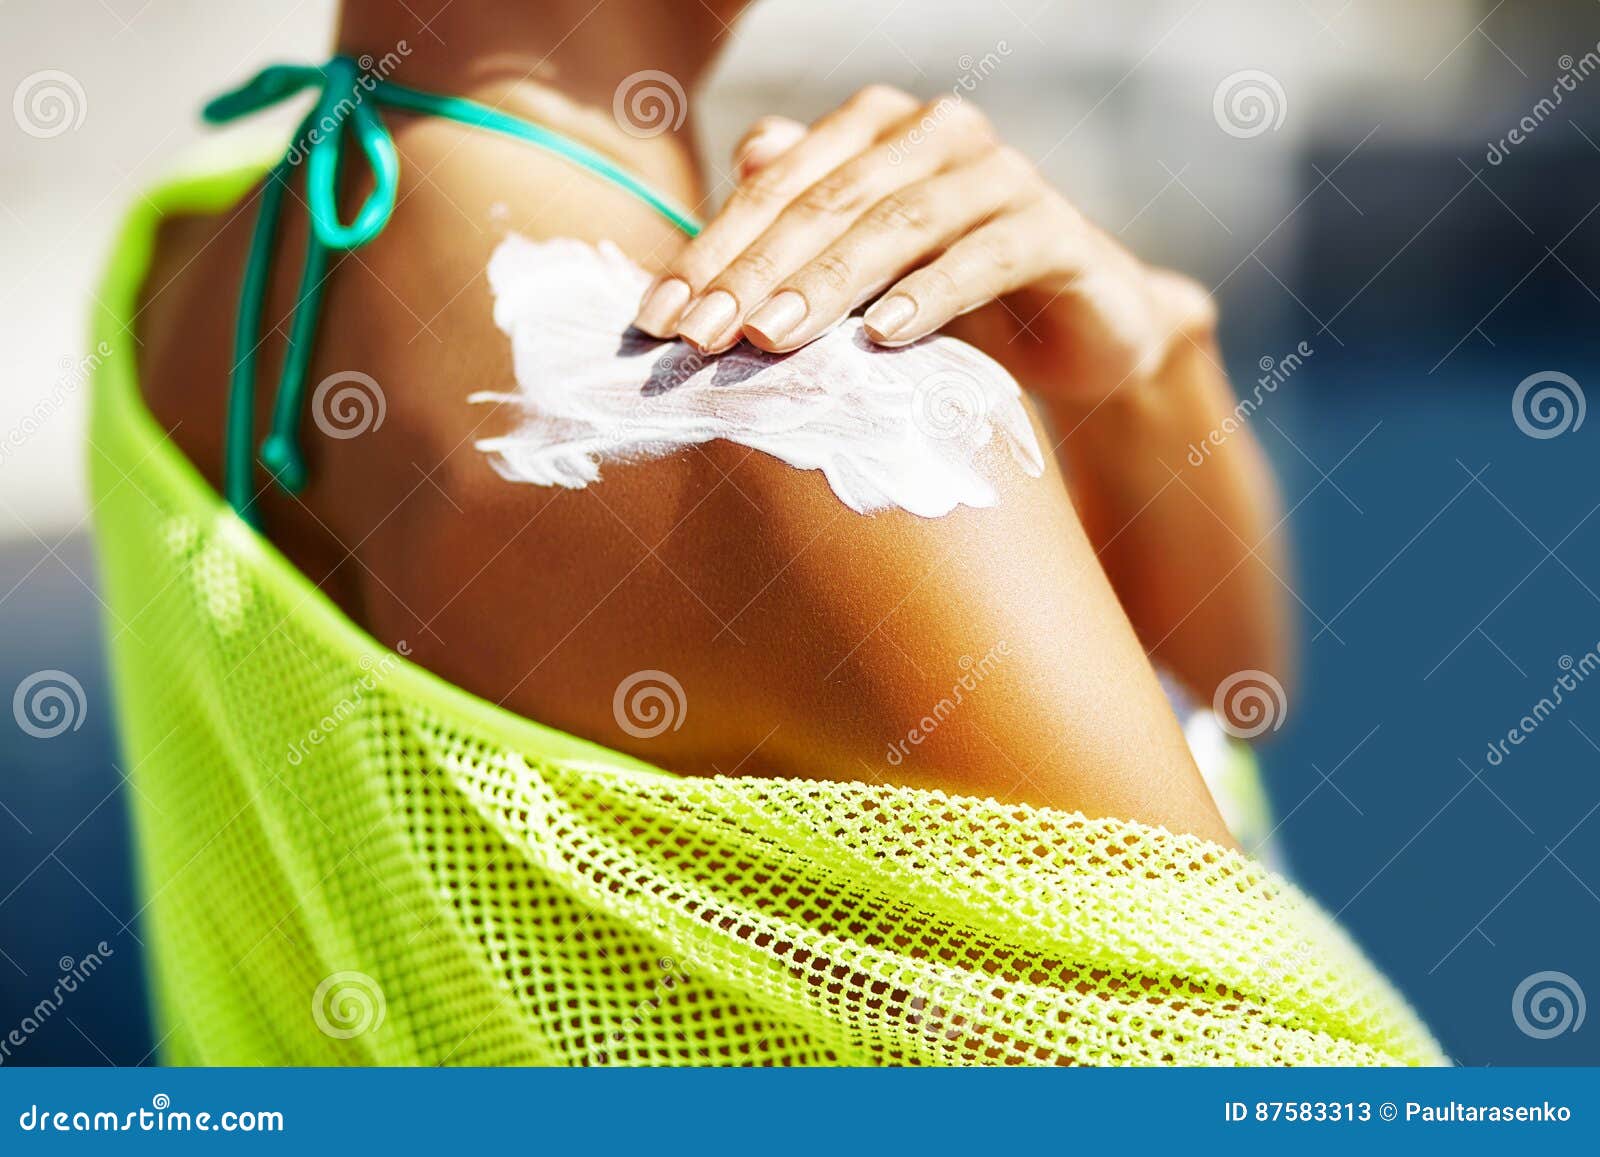 woman applying sunscreen on her shoulder